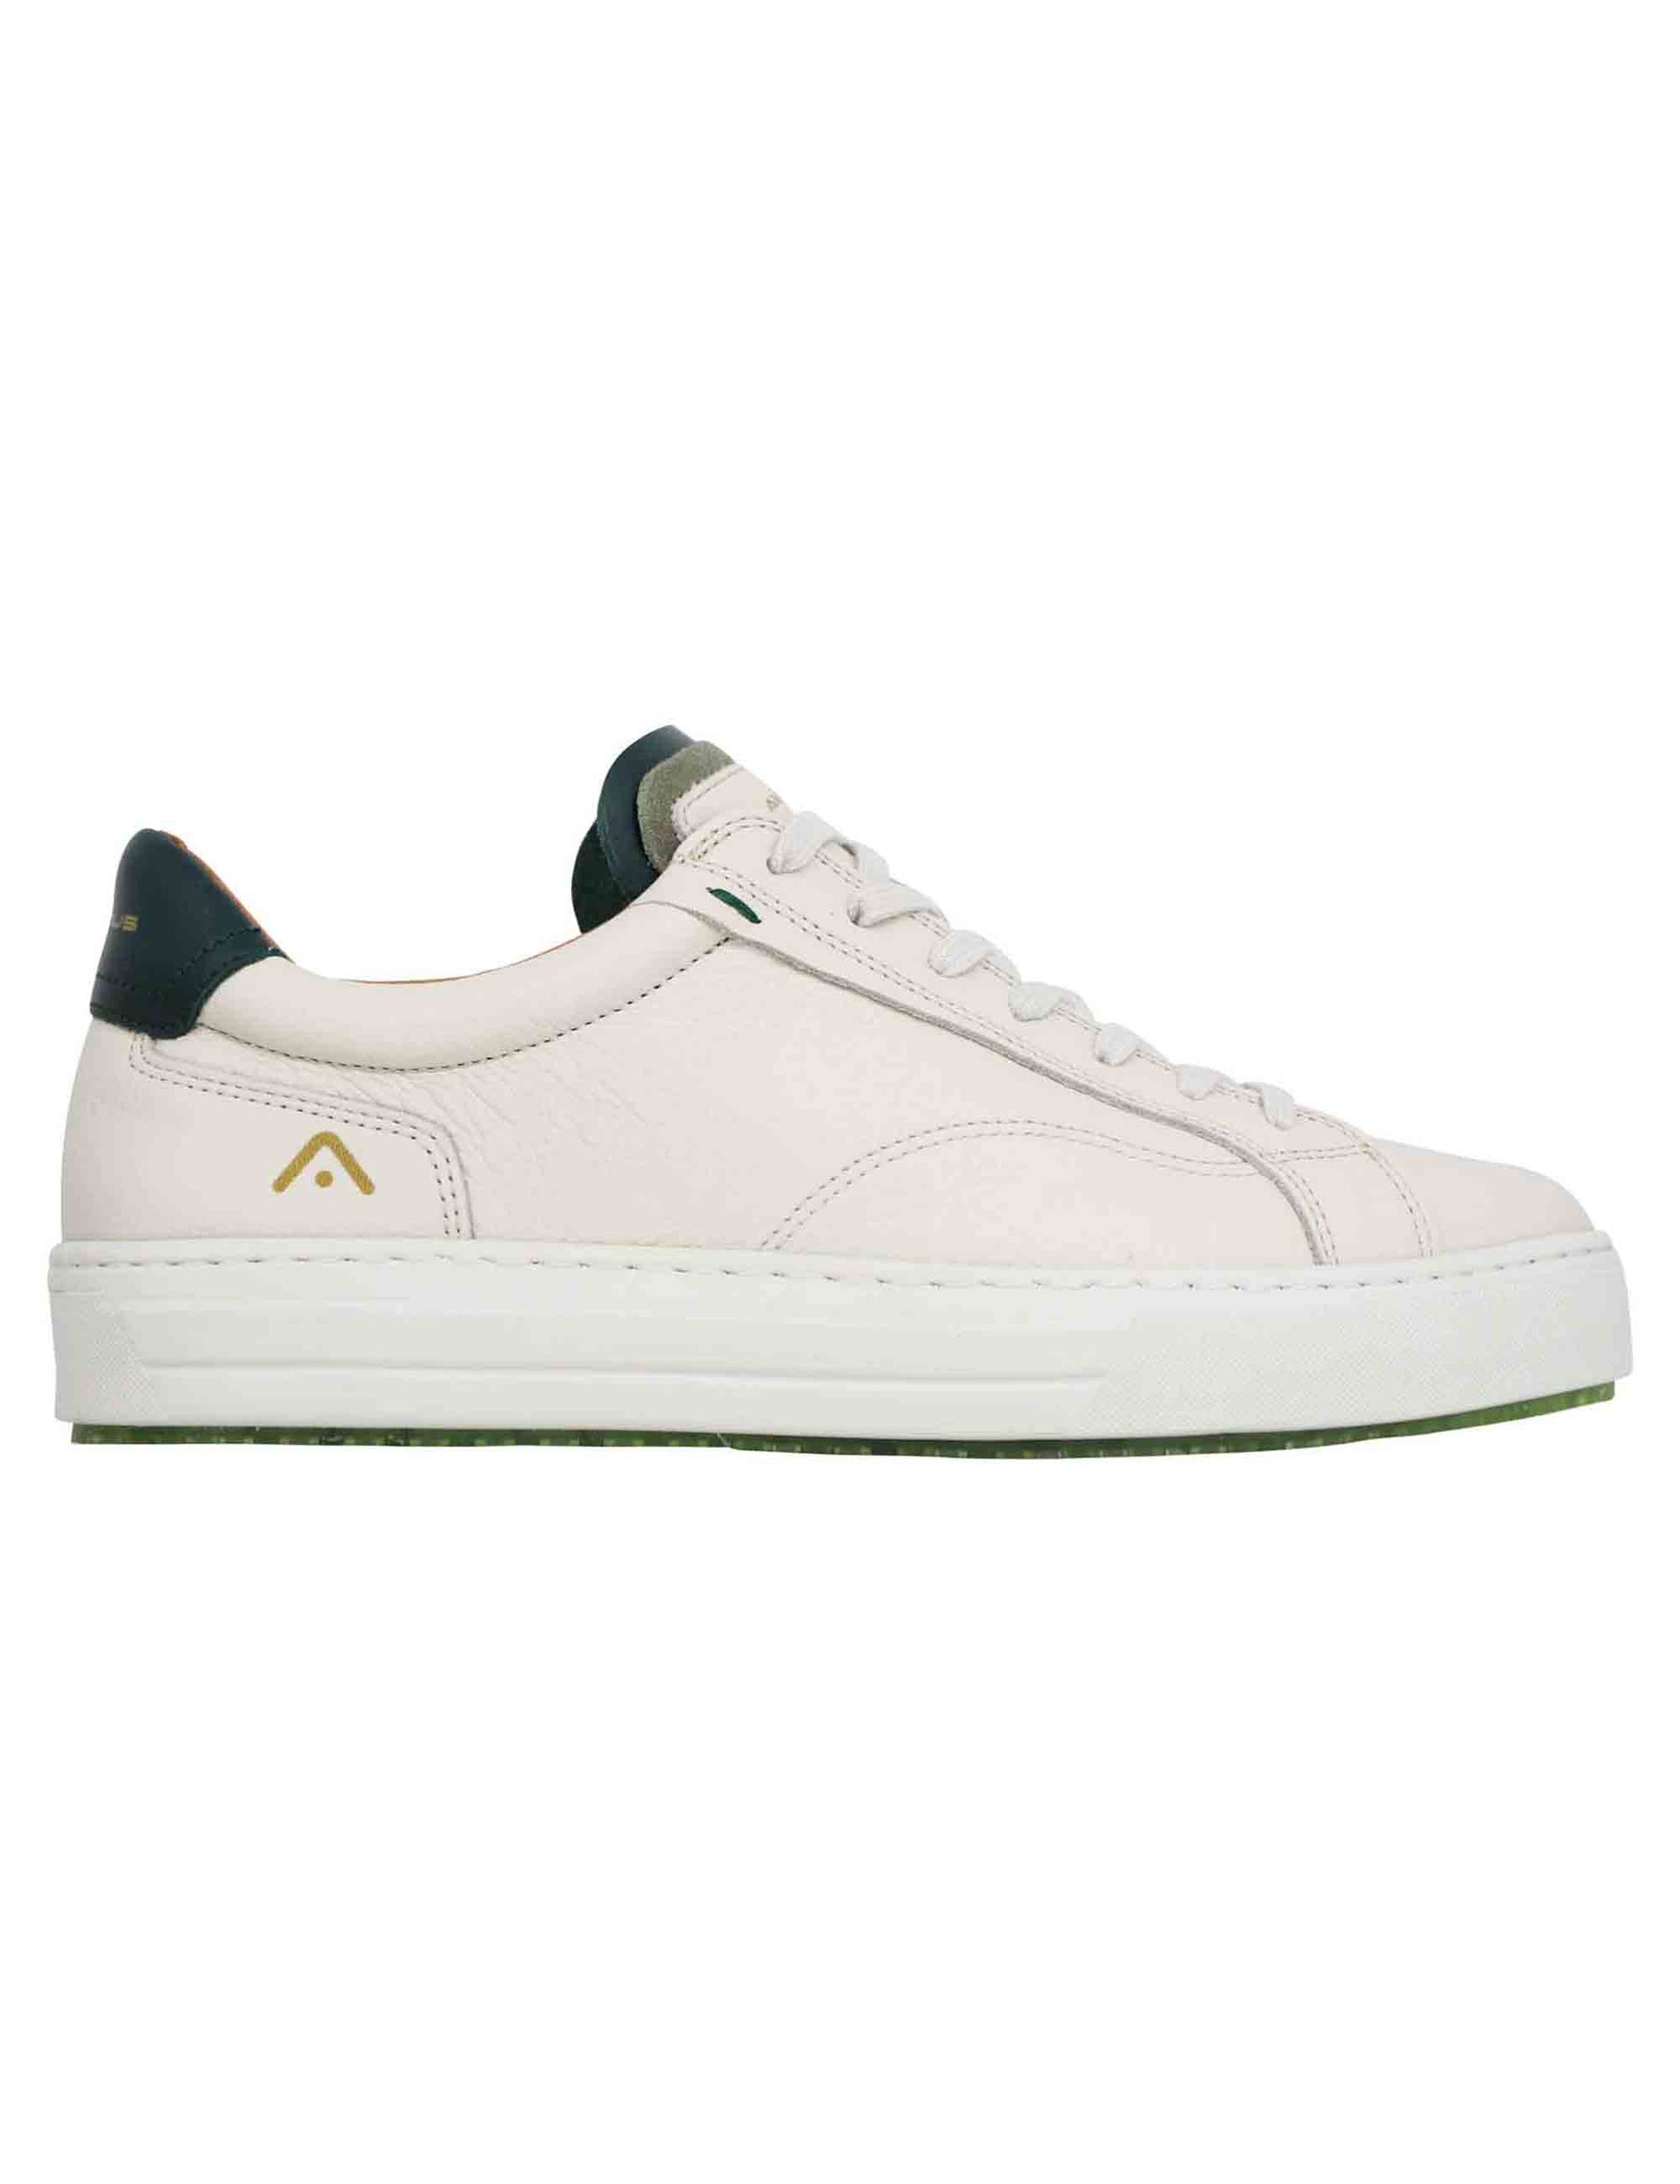 Anopolis men's sneakers in white leather